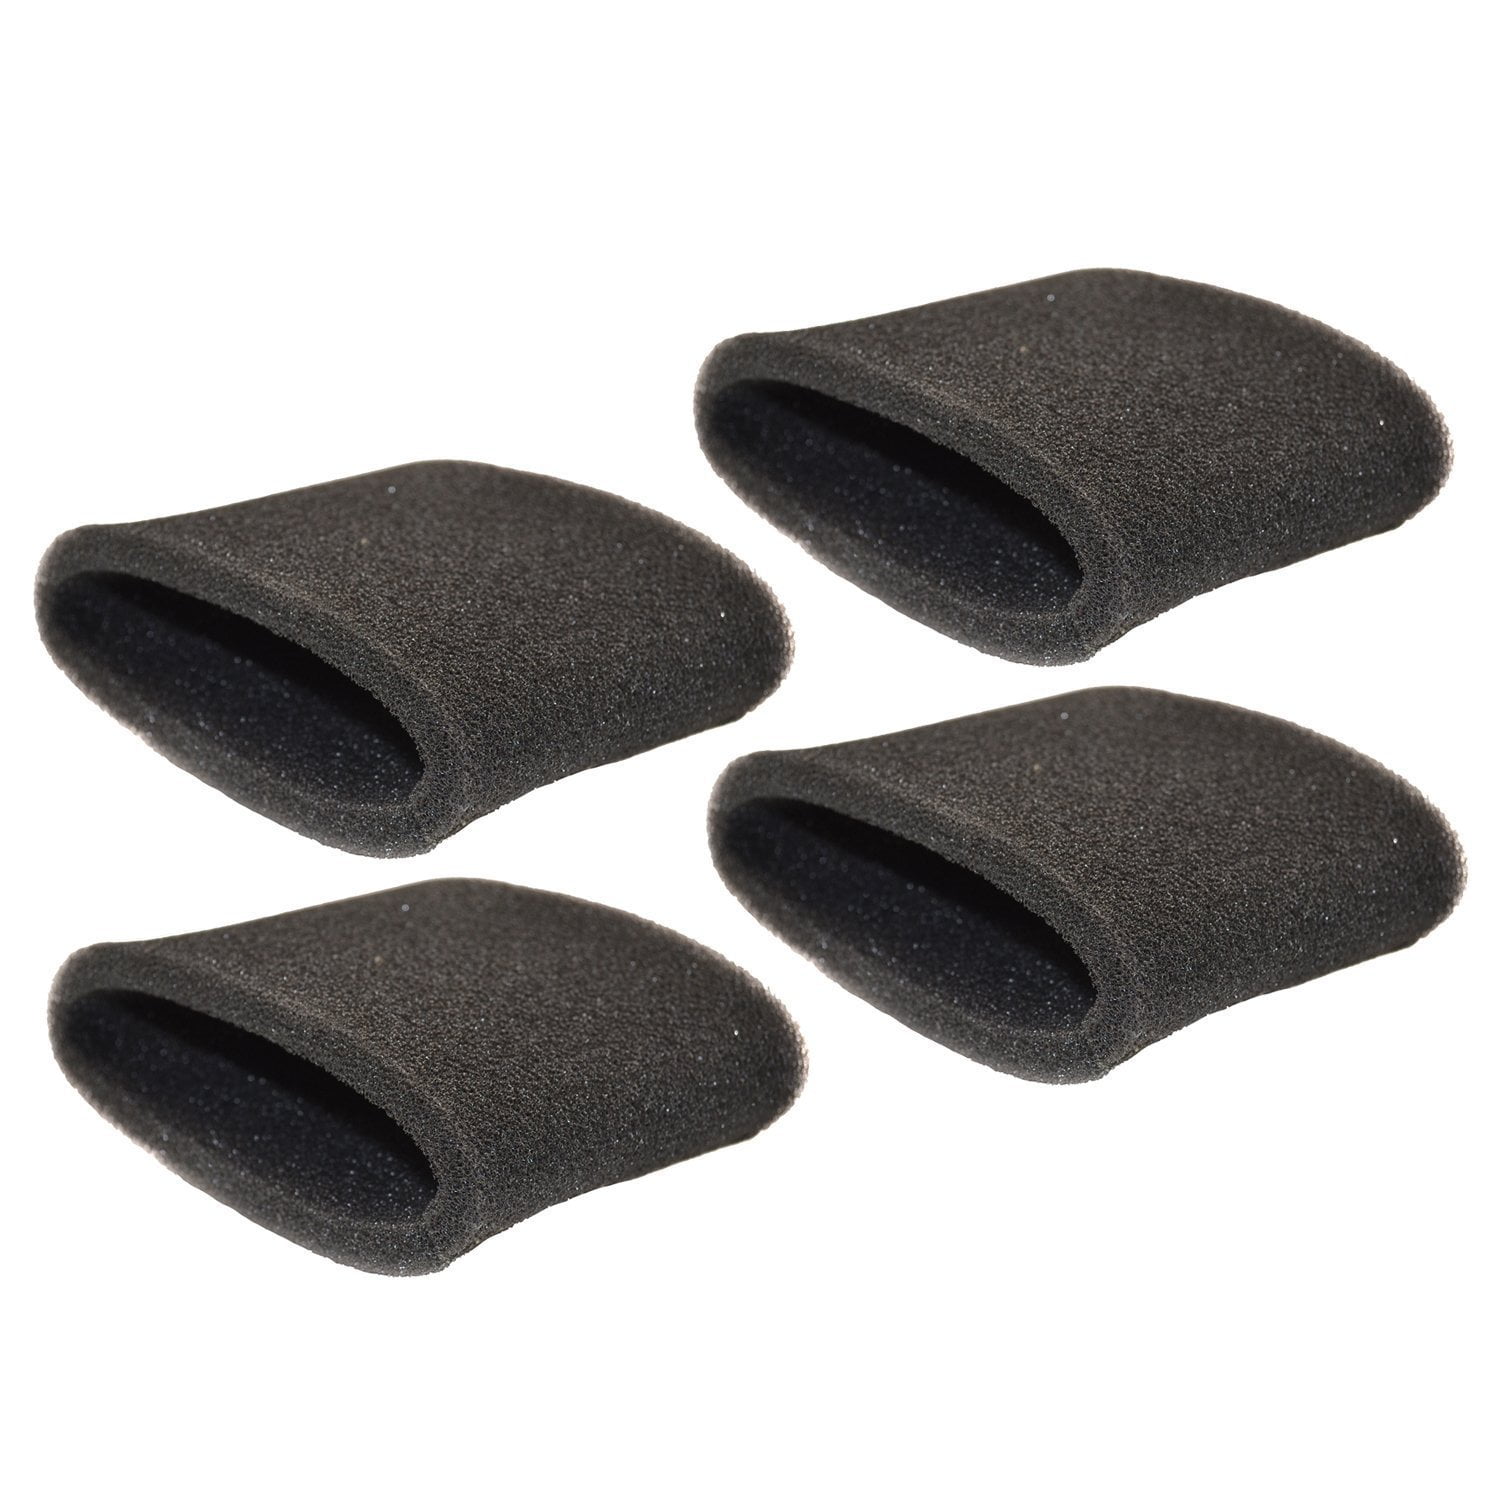 HQRP 4-pack Foam Filter Sleeve (Small) for Shop-Vac 9052600 / 90526 ...